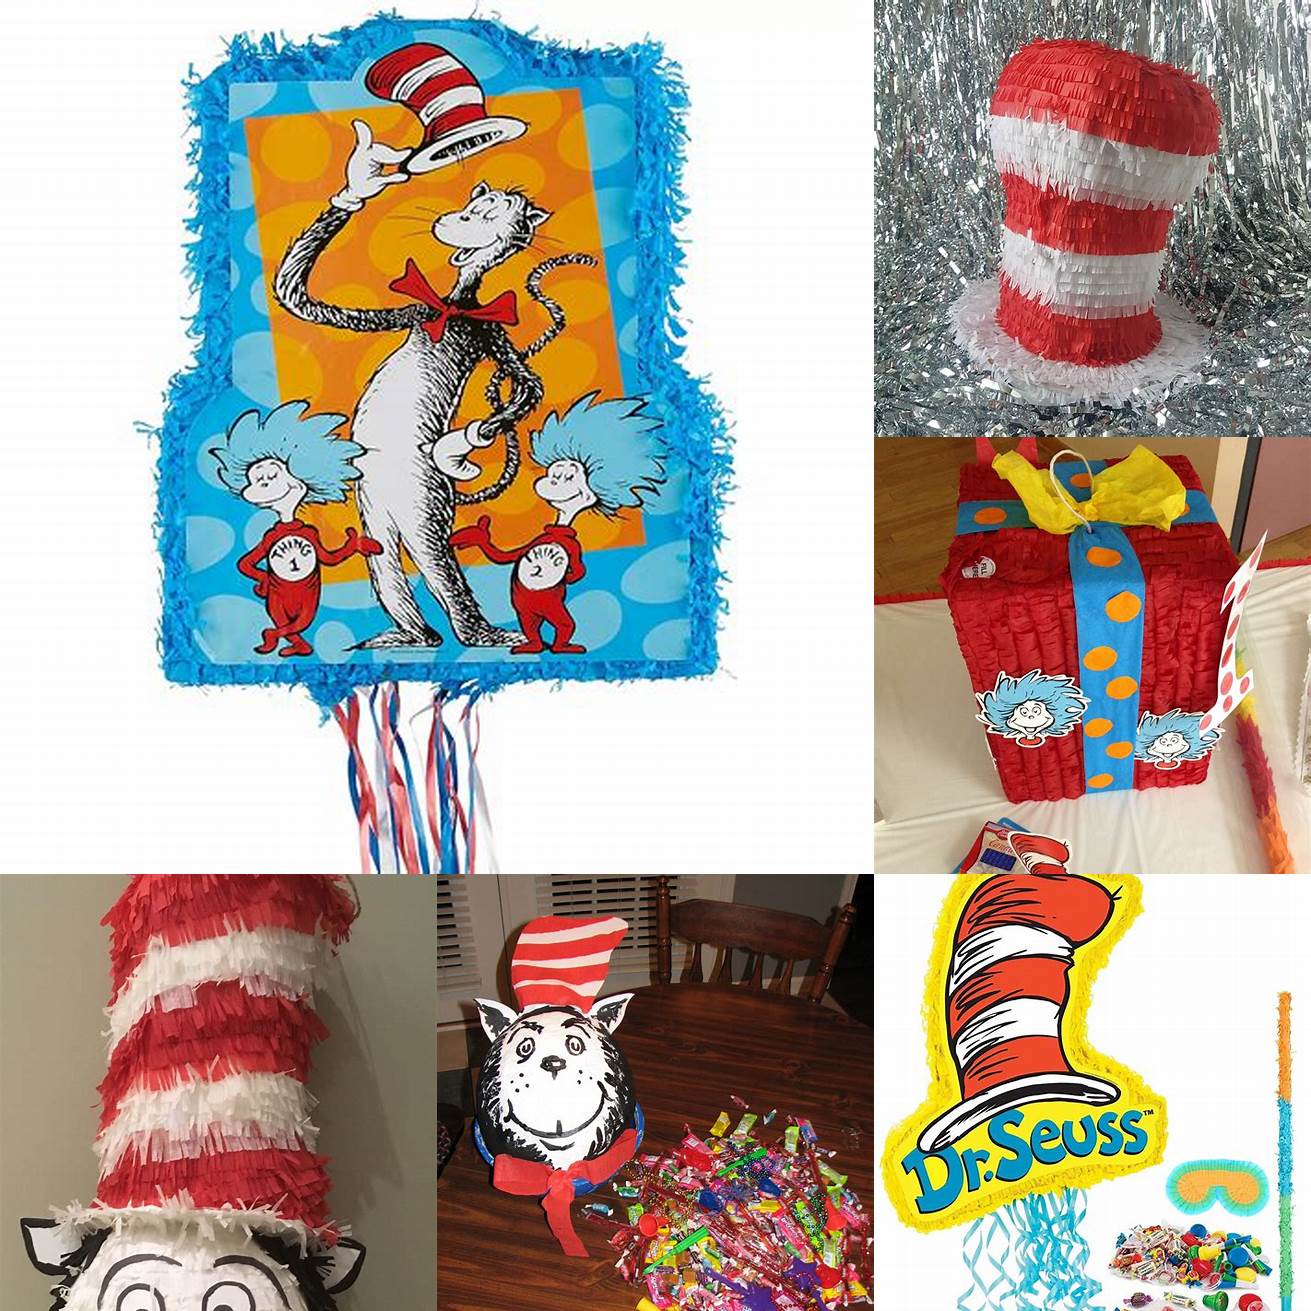 4 Cat in the Hat Pinata with party hats